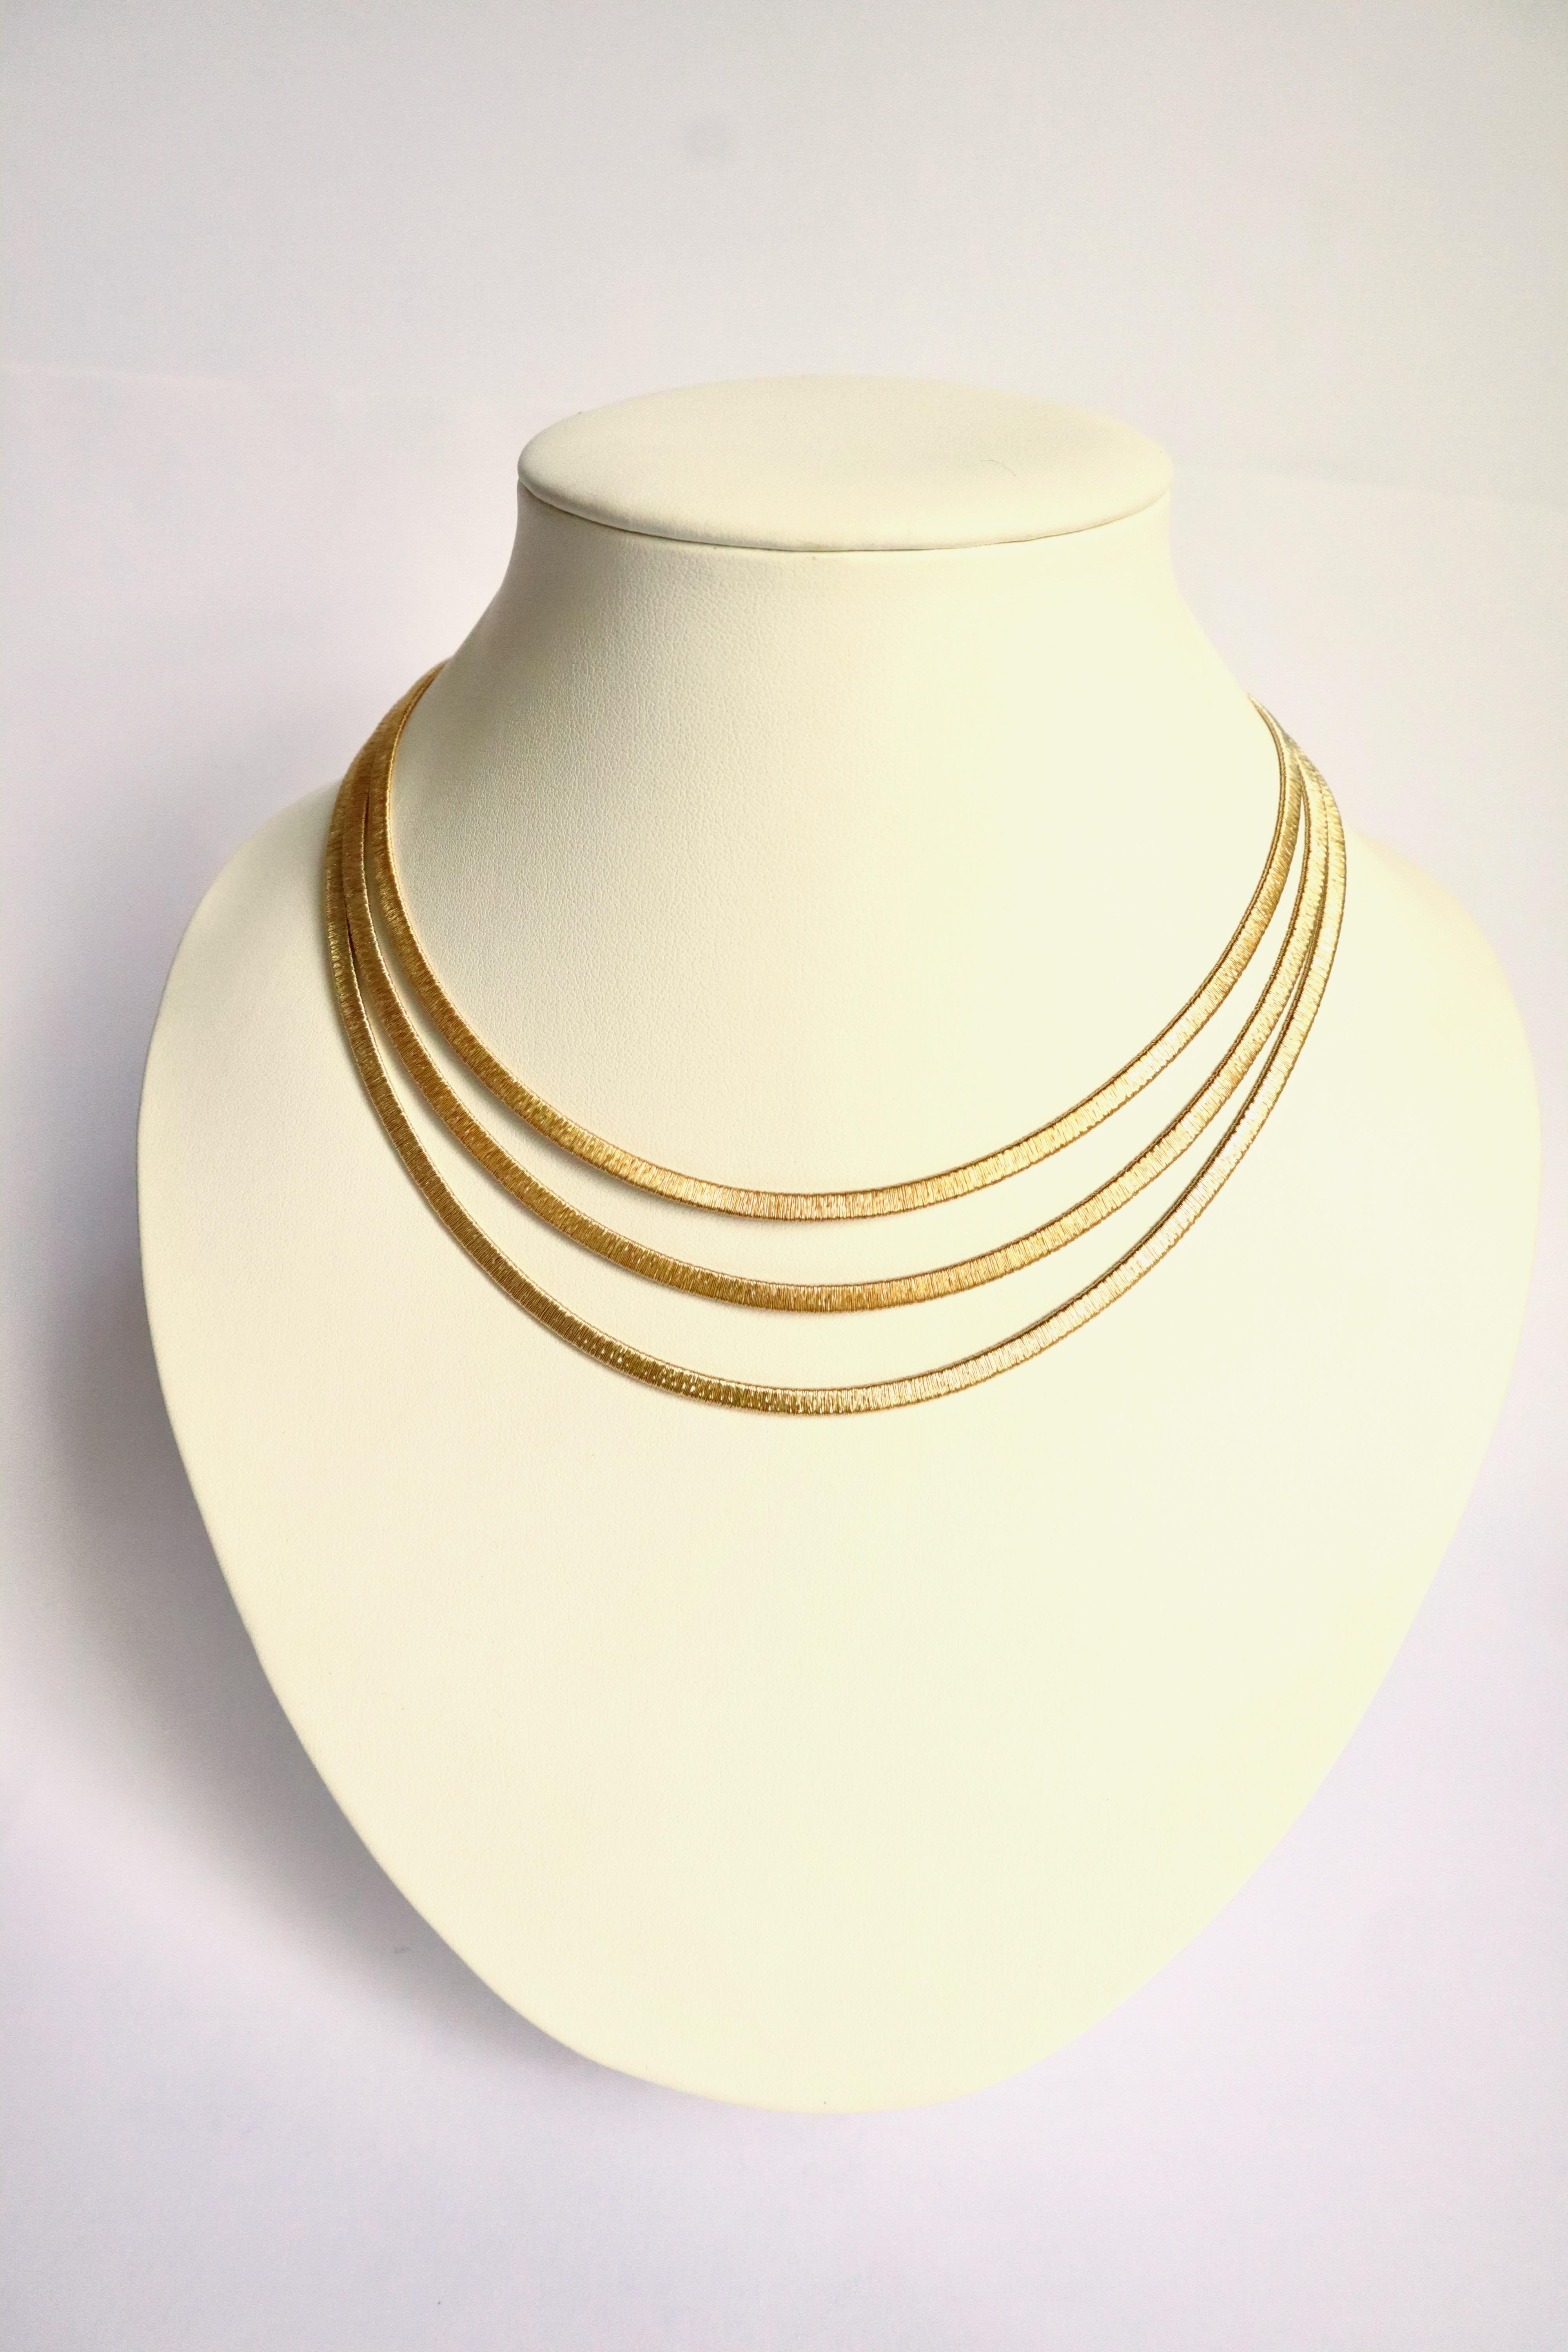 Necklace 3 flexible gold wires in 18 kt yellow gold. Each wire is composed of a yellow gold wire wound on a flexible gold mesh frame. 
Tongue clasp with security eight. 
Weight: 41g. 
Eagle's head hallmark. 
Length: 41 for the shortest row to 45 cm